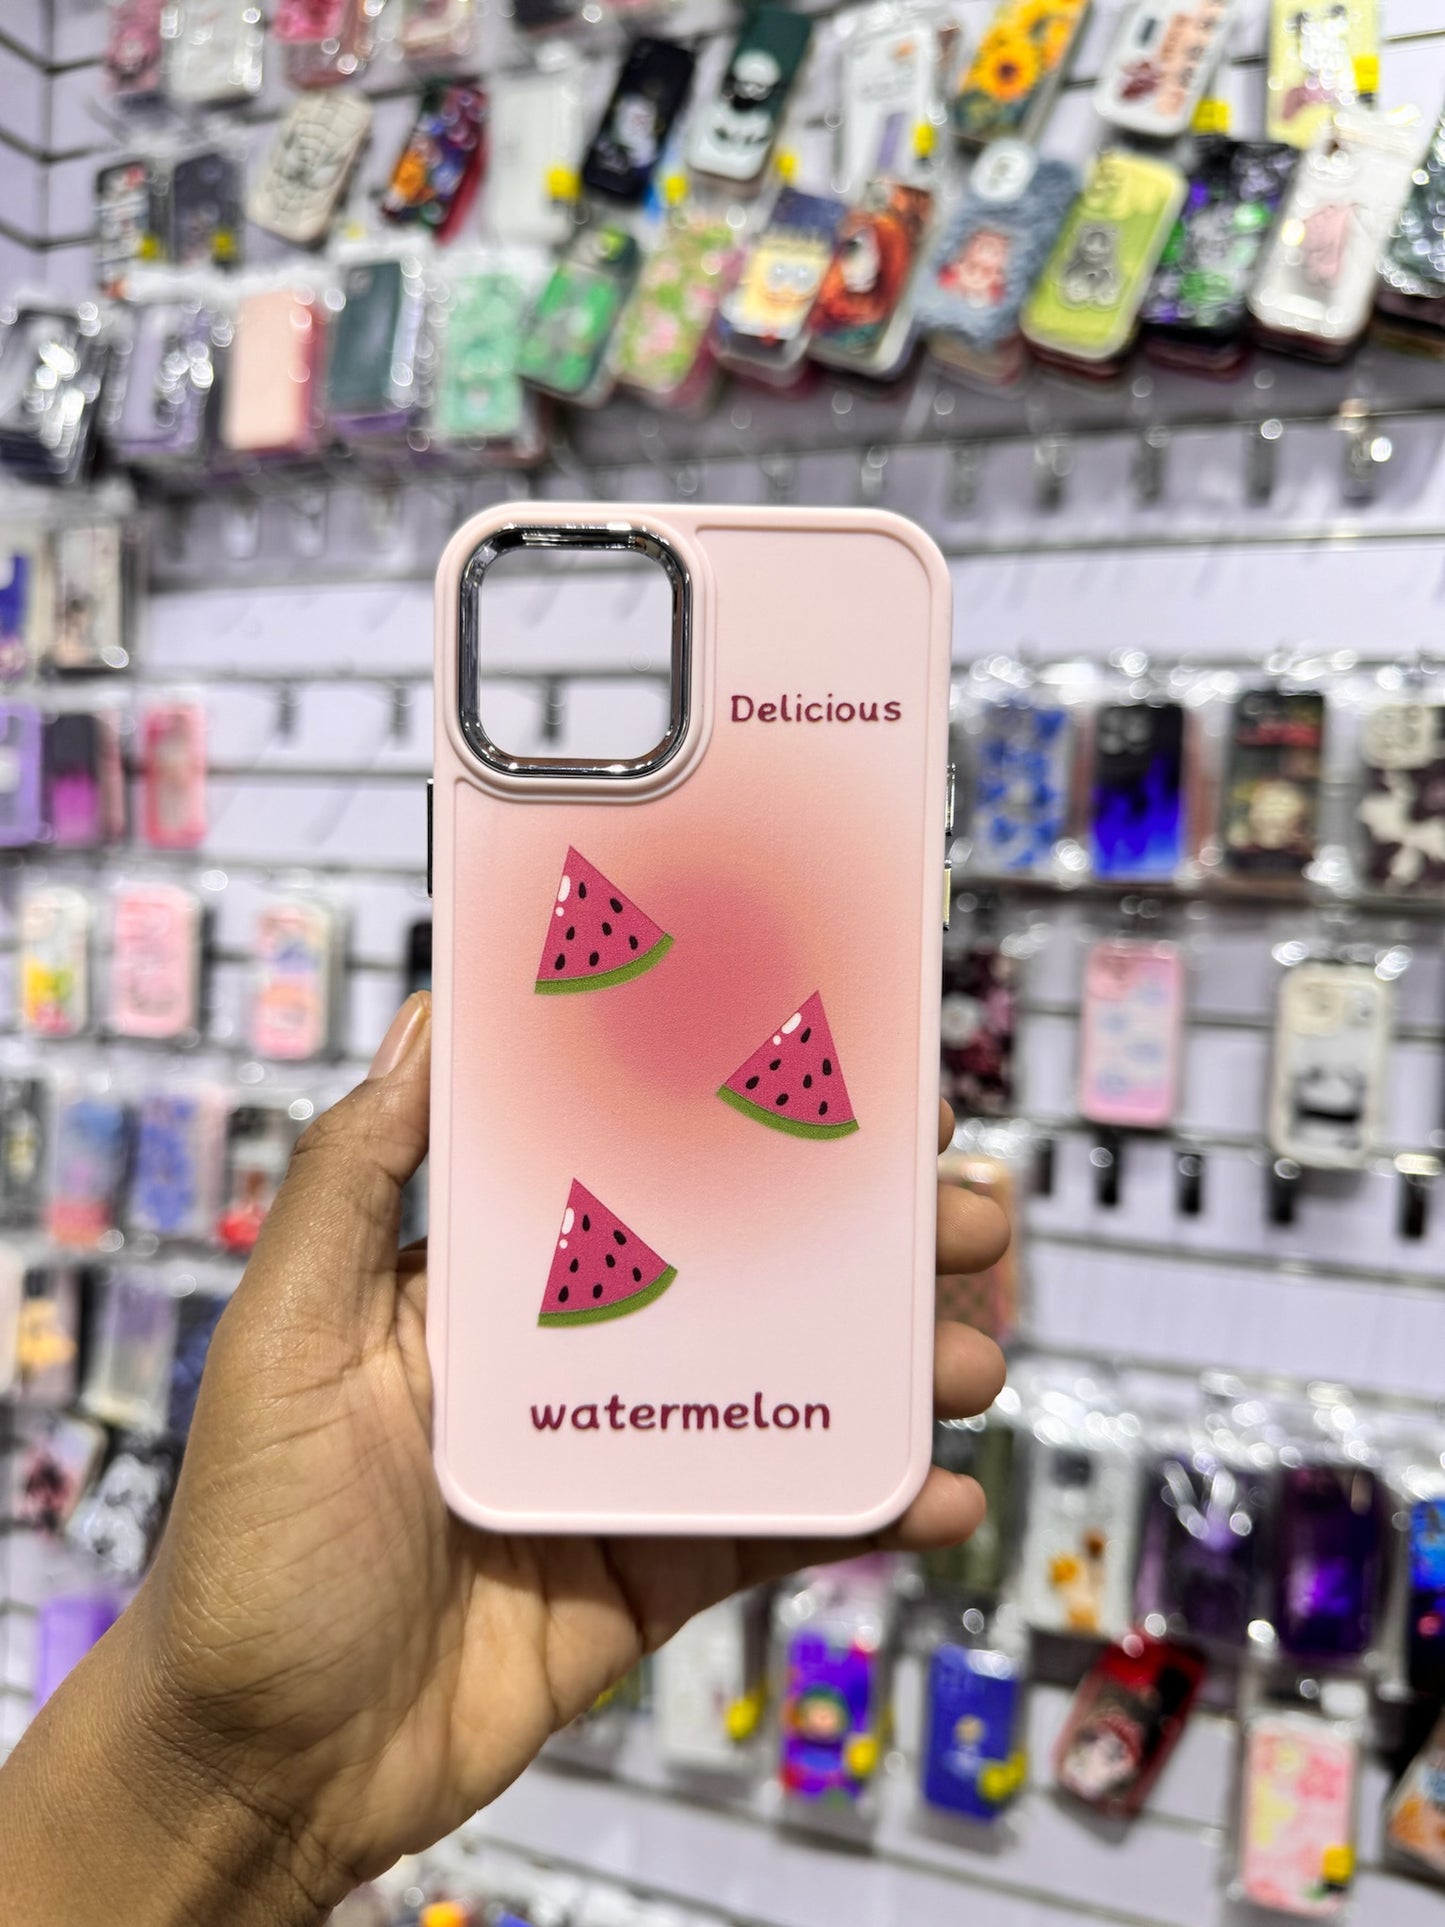 Delicious Watermelon Case For iPhone